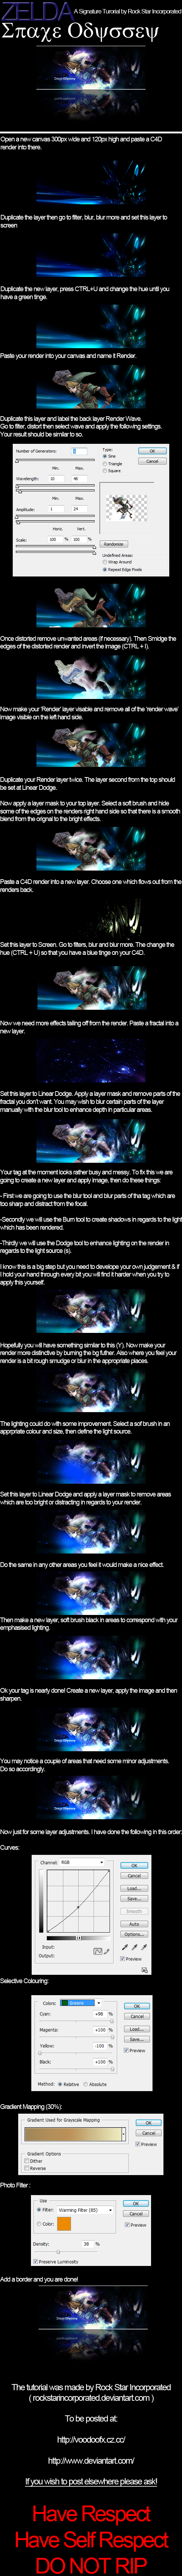 zelda_space_odyssey_tutorial_by_rockstarincorporated-d35cnx4.png